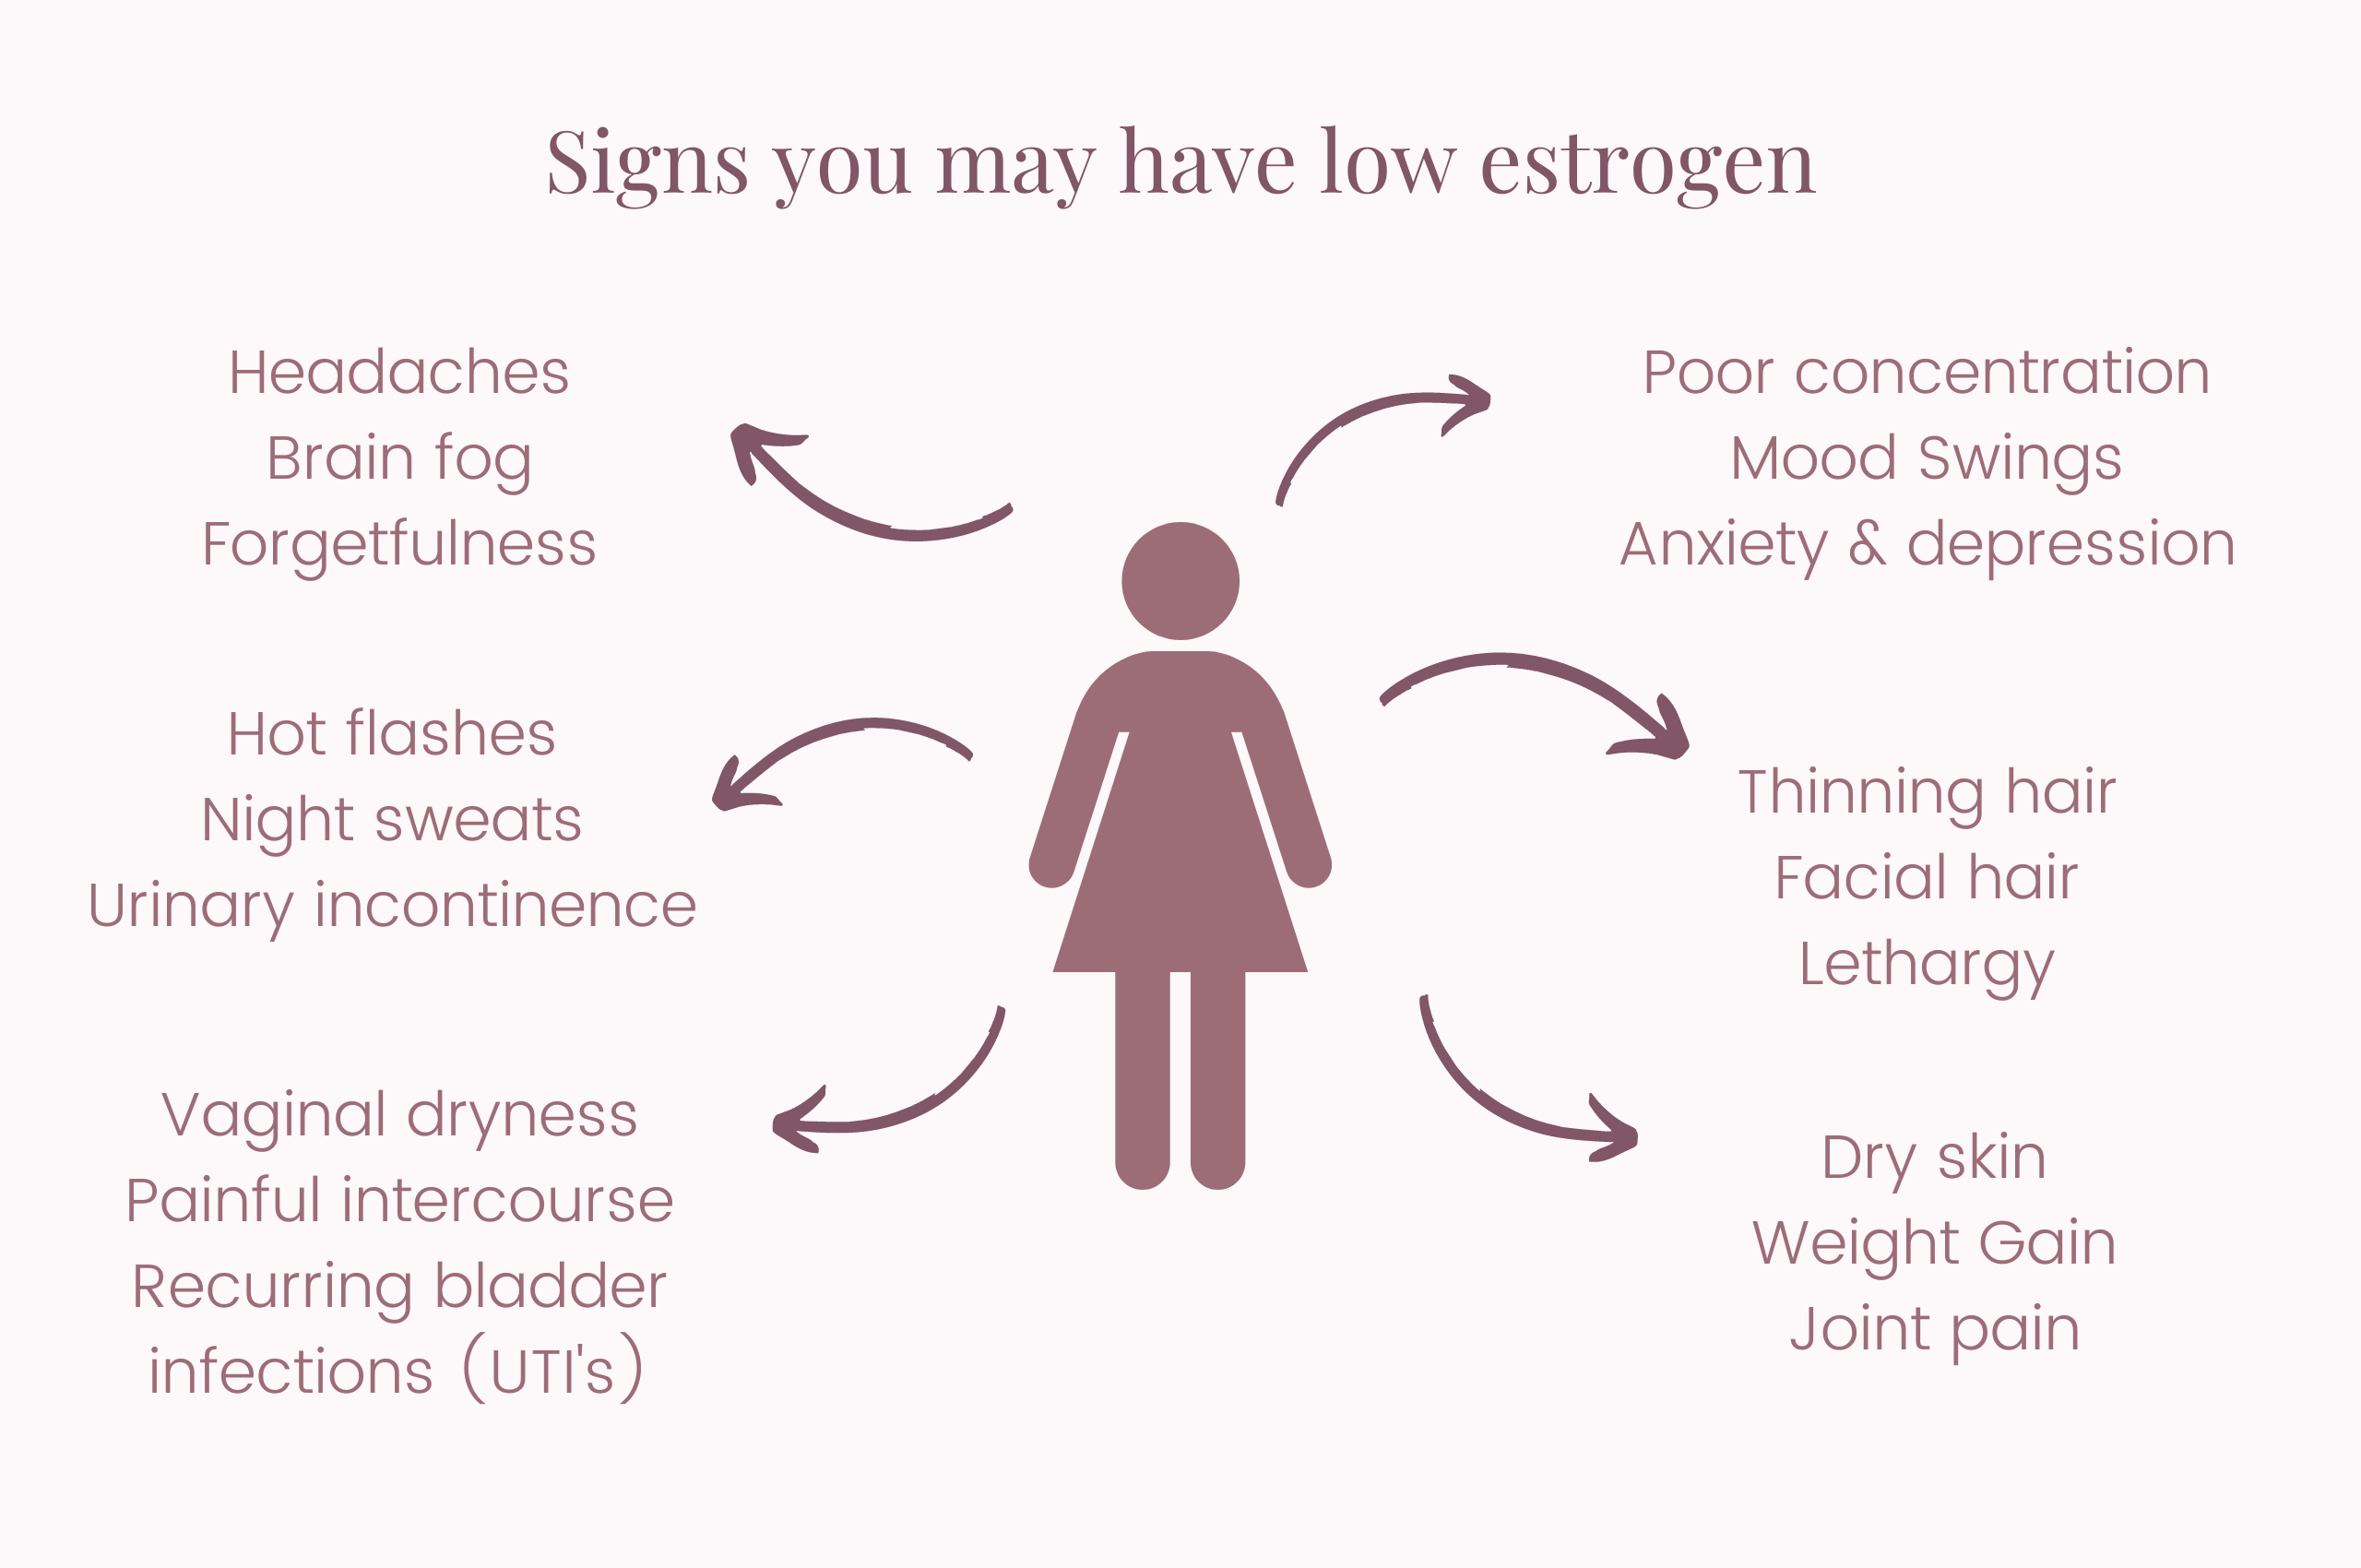 An infographic that depicts the signs of low estrogen